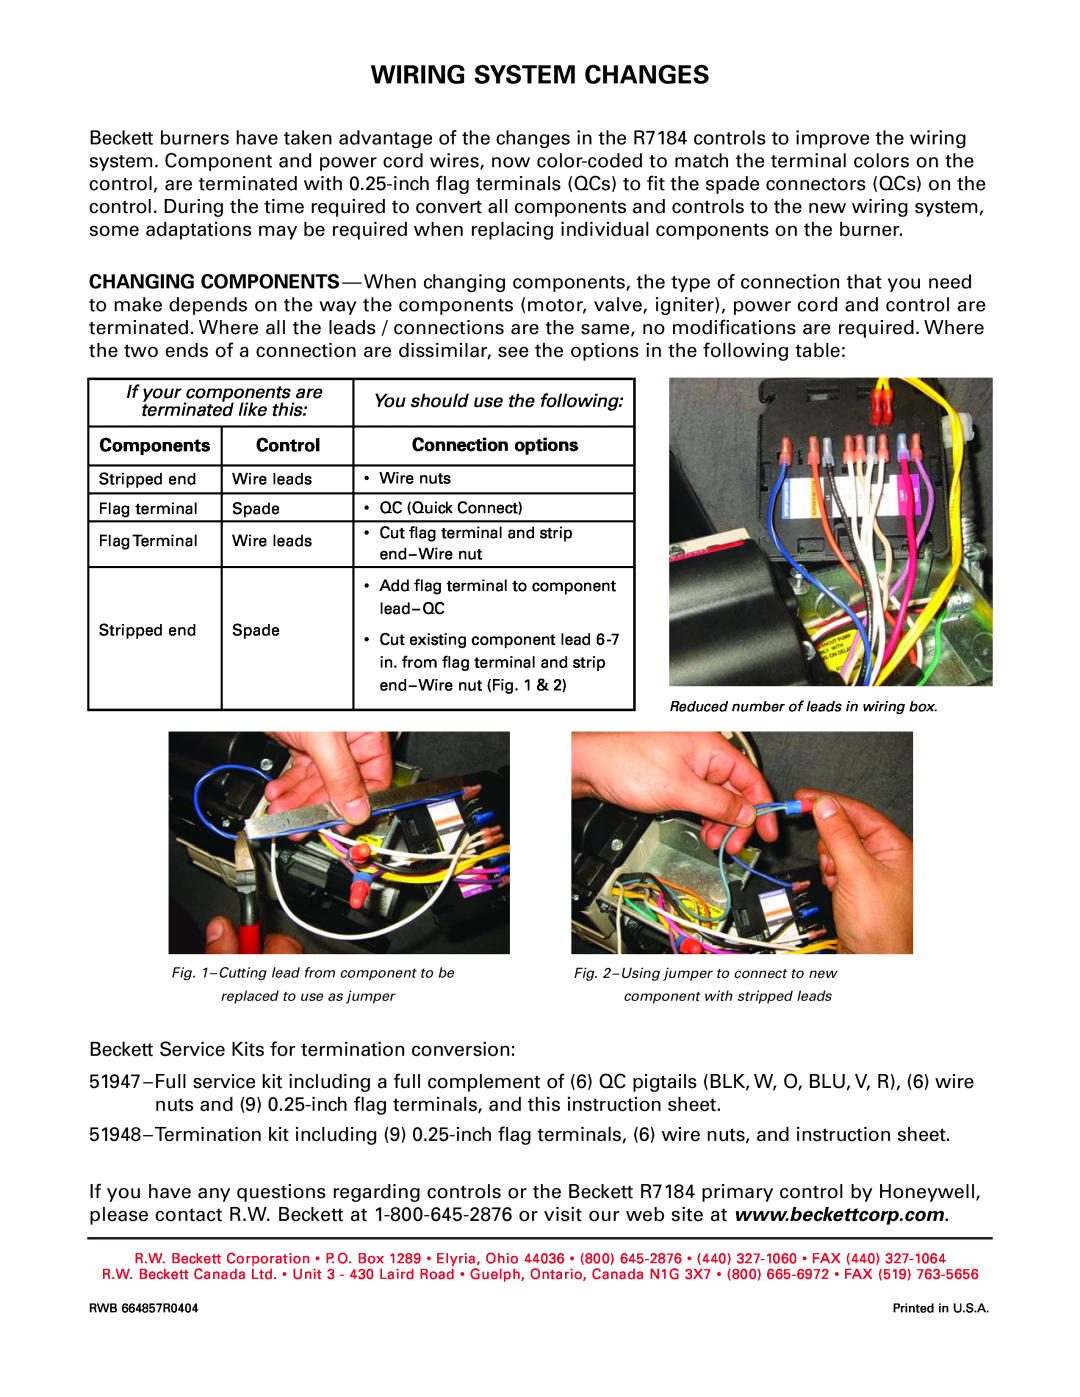 Beckett R7184 manual Wiring System Changes 